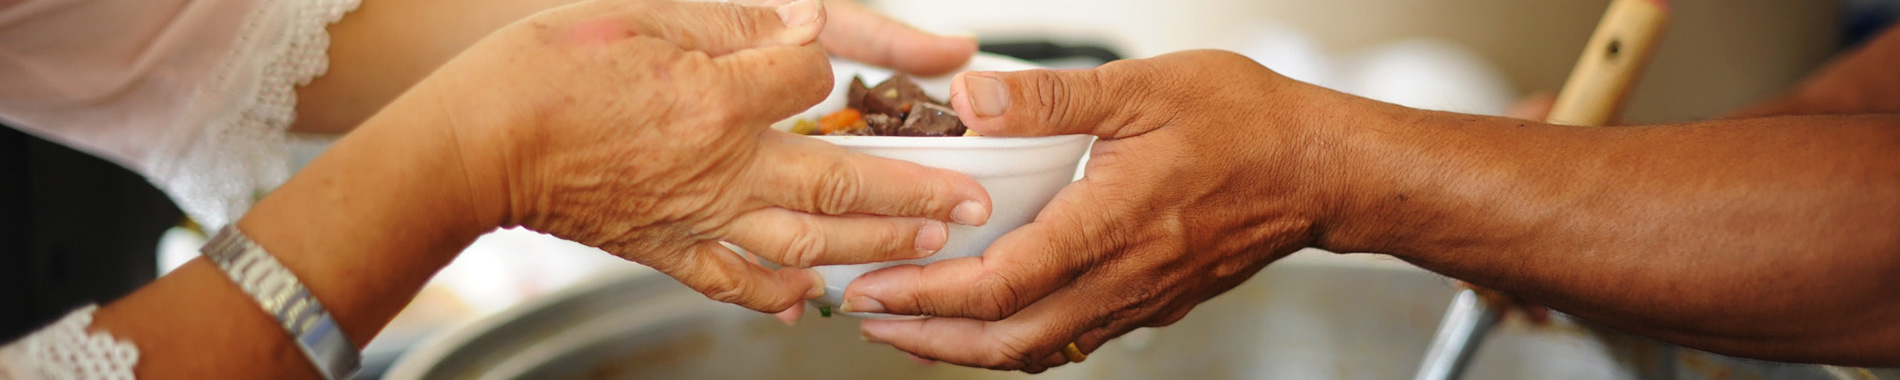 close-up of woman handing someone bowl of food